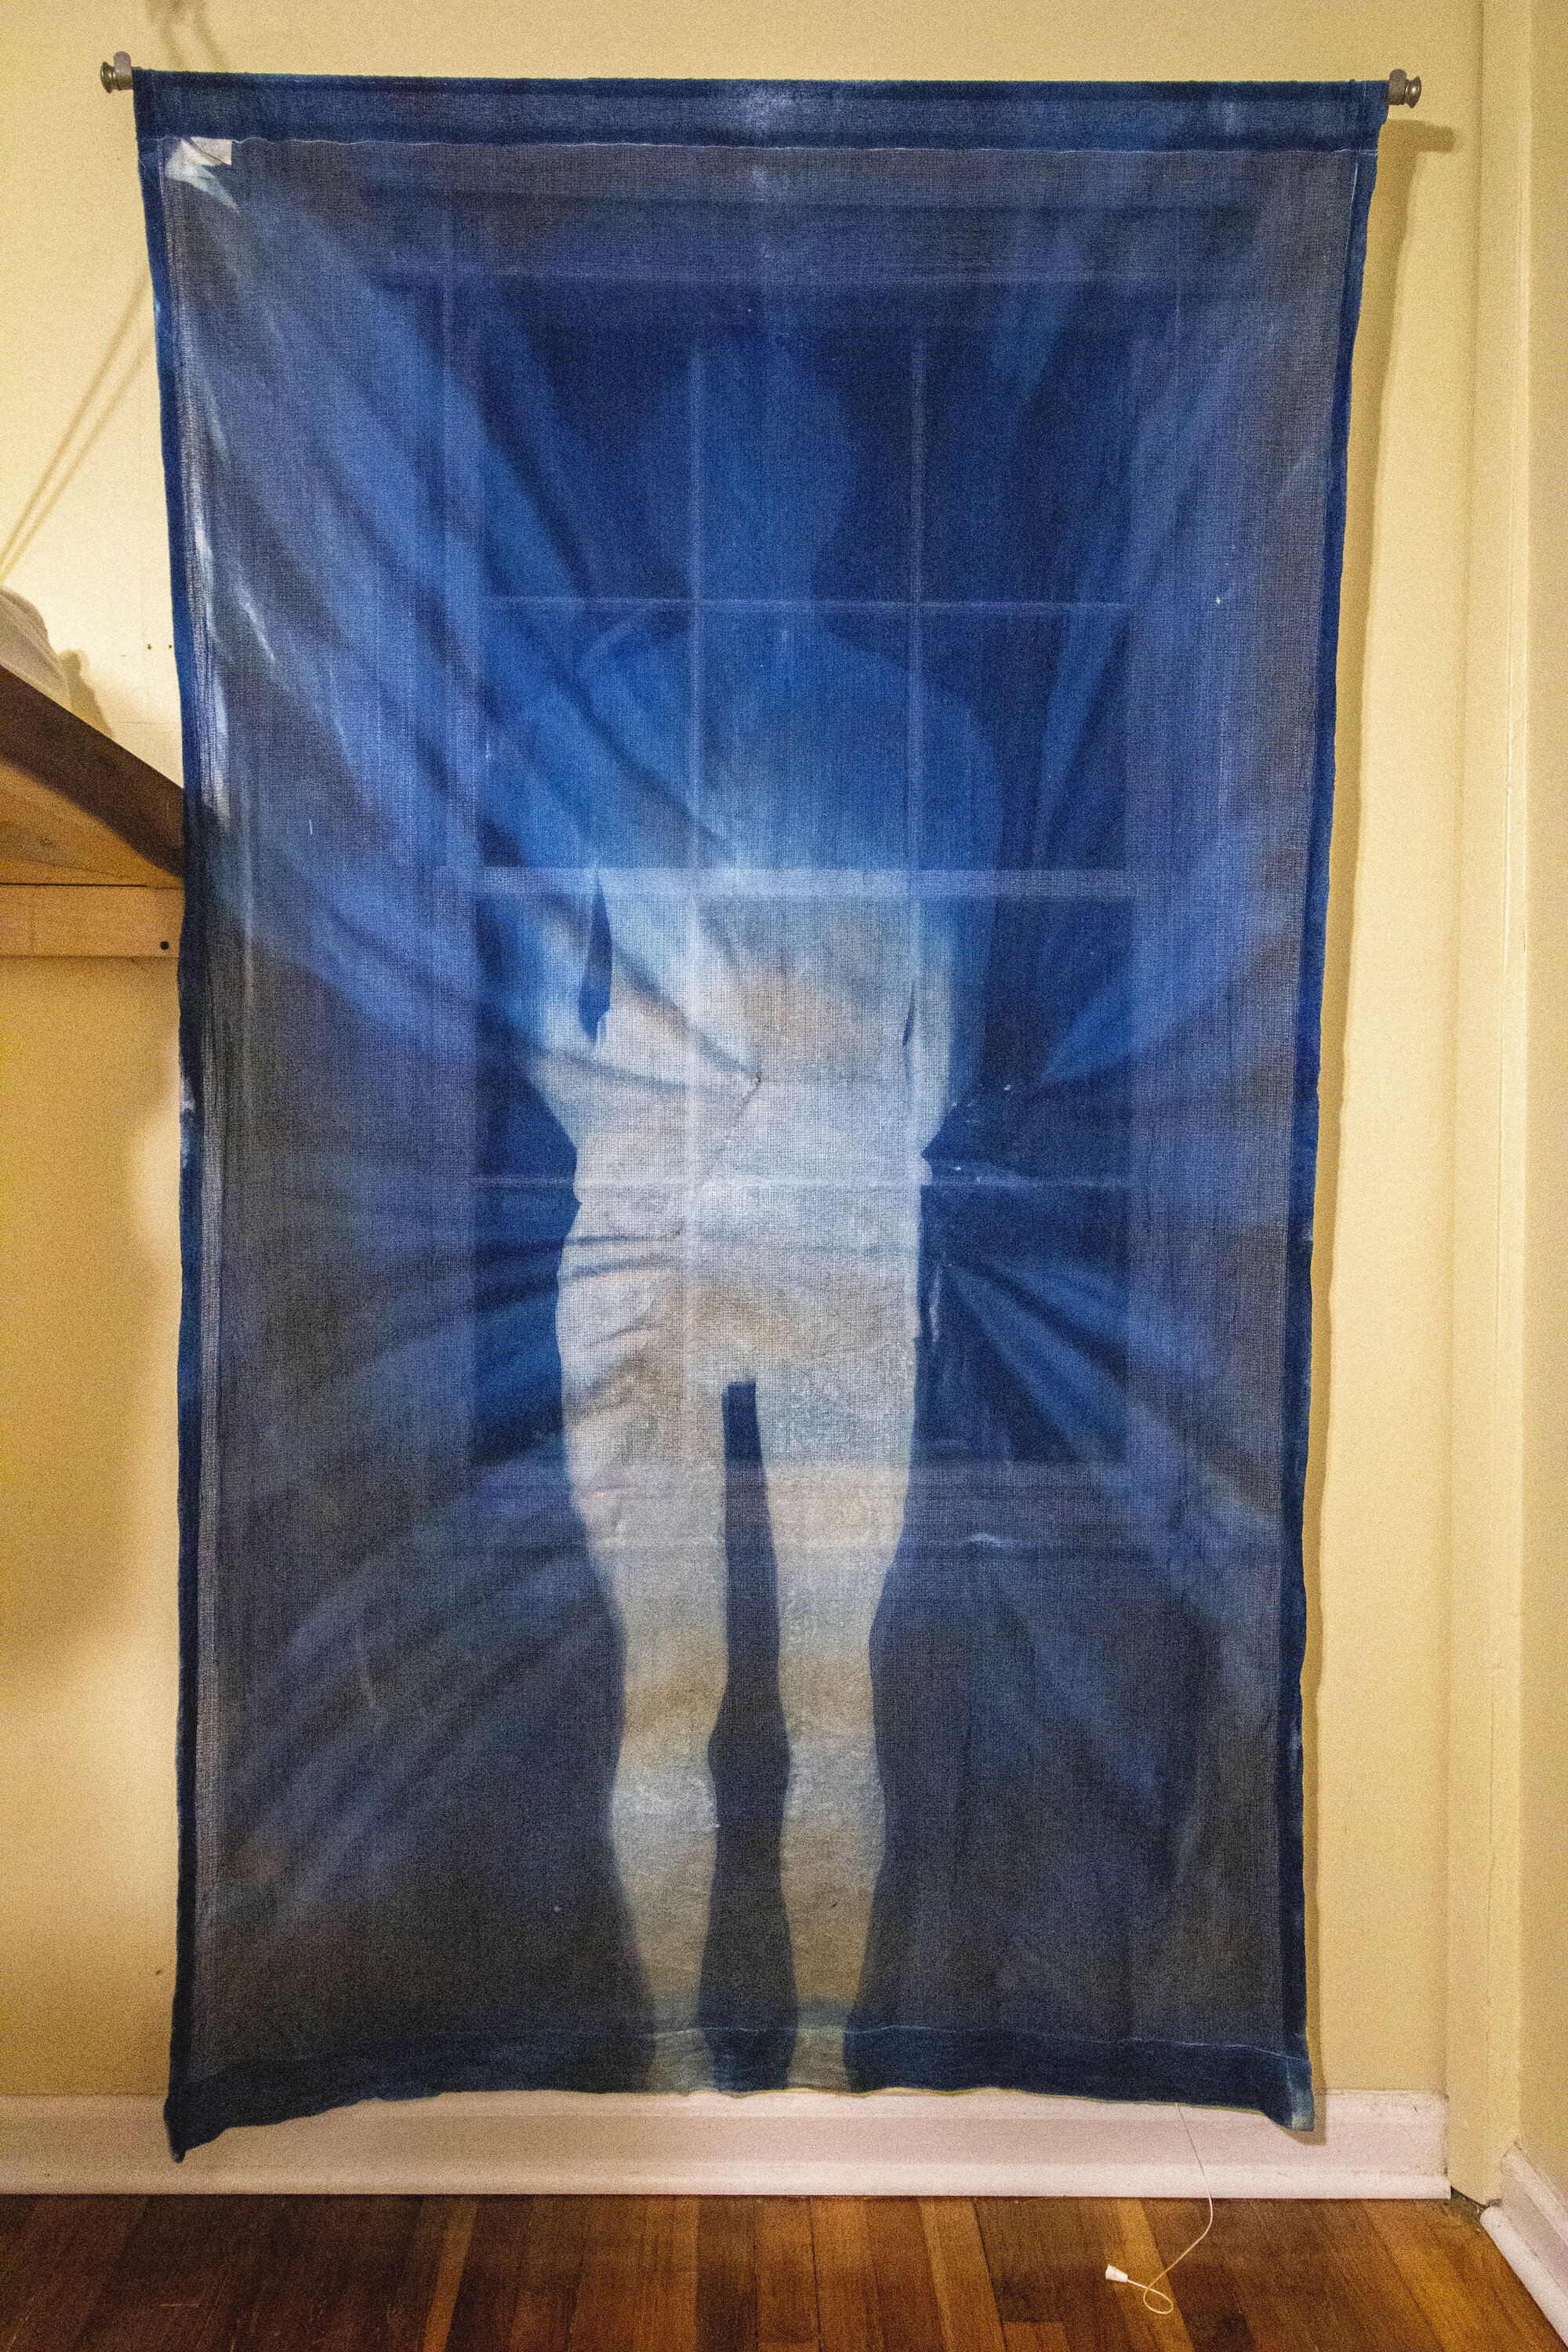 Fading [night], 2020, cotton curtain, cyanotype solution, curtain rod, and hardware, 55 x 84 inches.